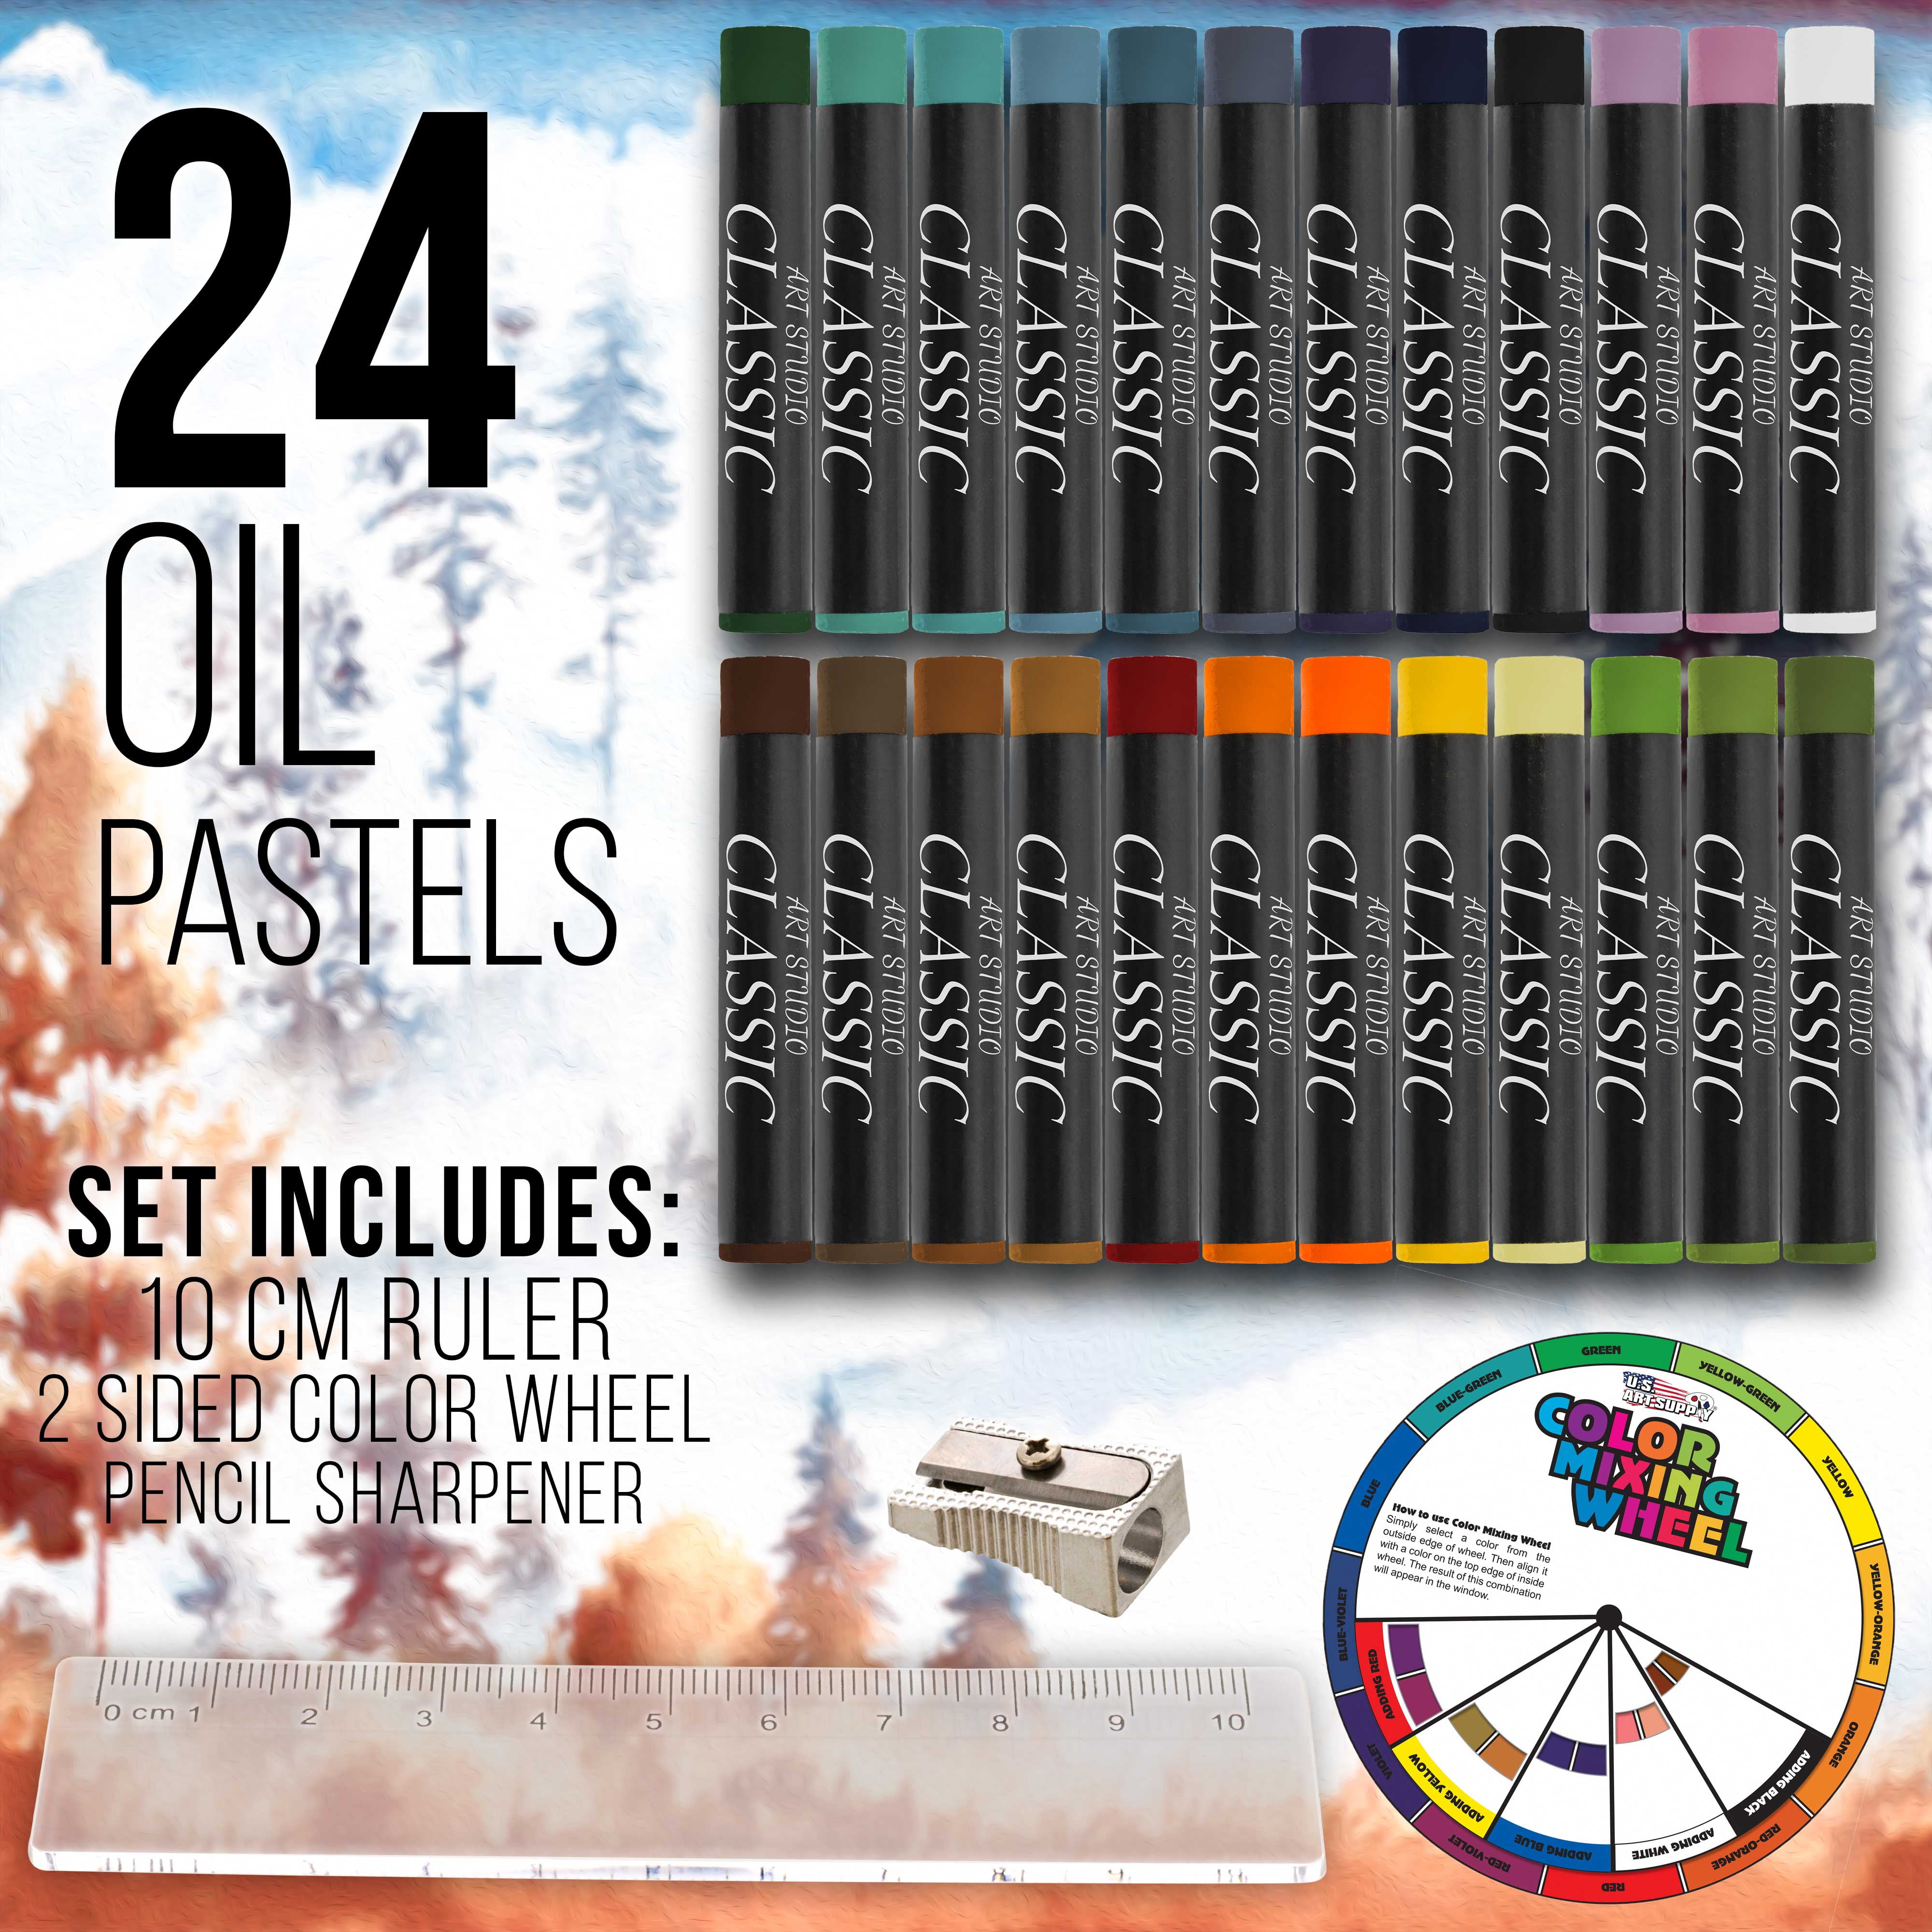 Buy 163 Piece Deluxe Art Supply Set (Coloring Pencils, Crayons, Oil  Pastels, Markers, Water Paint, Eraser, Pencil, Sharpener, Liquid Glue and  White Glue) at ShopLC.